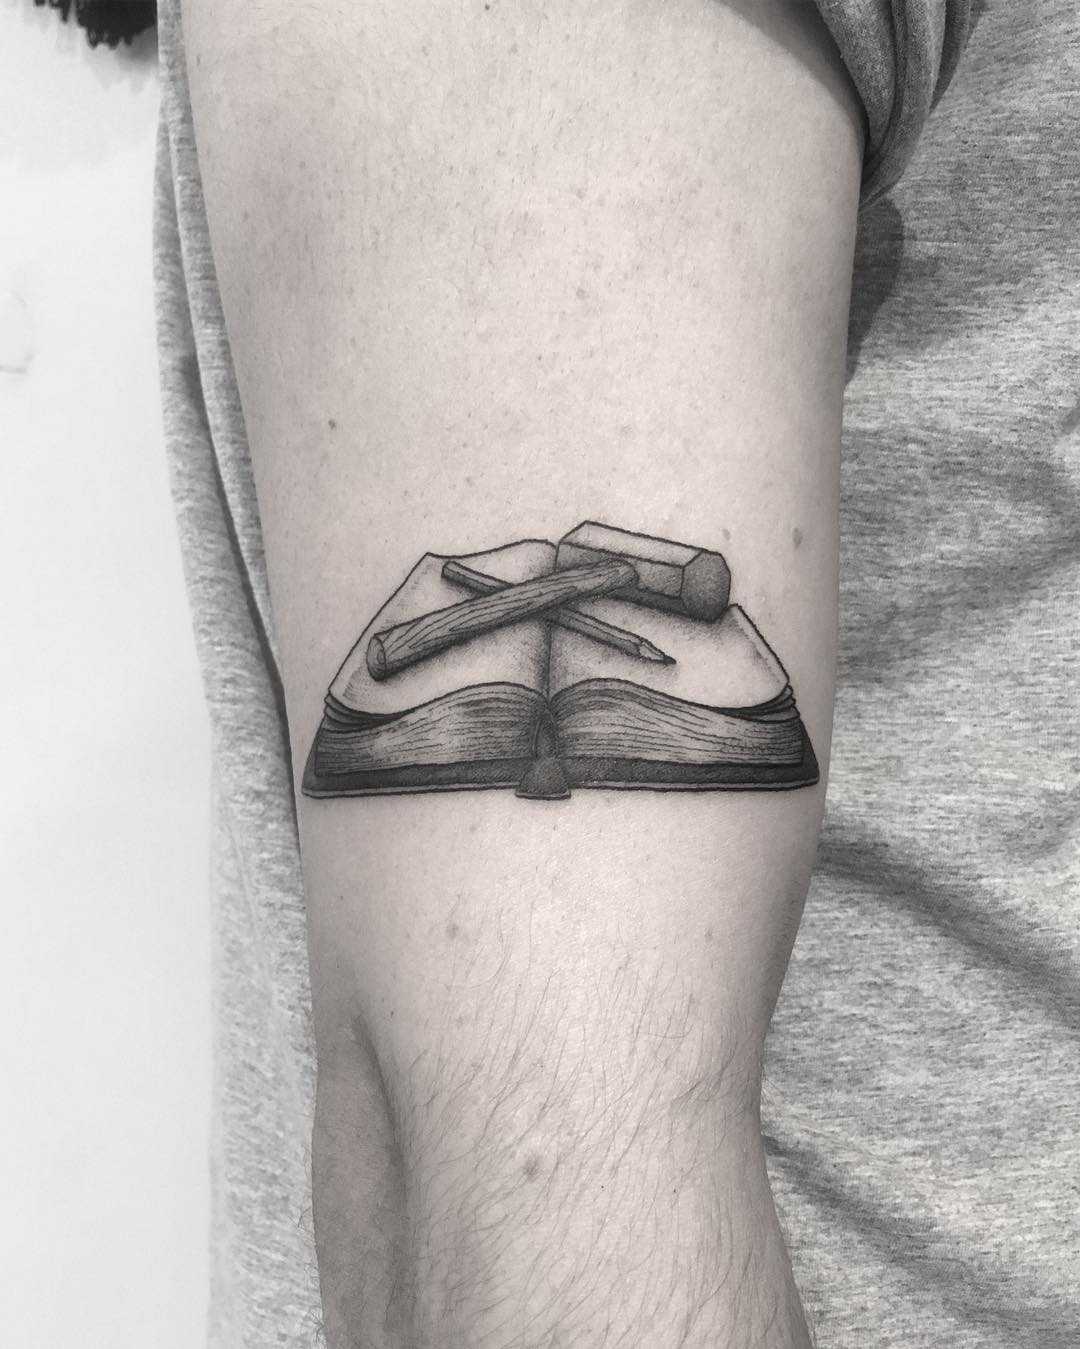 Book, pencil, and hammer tattoo